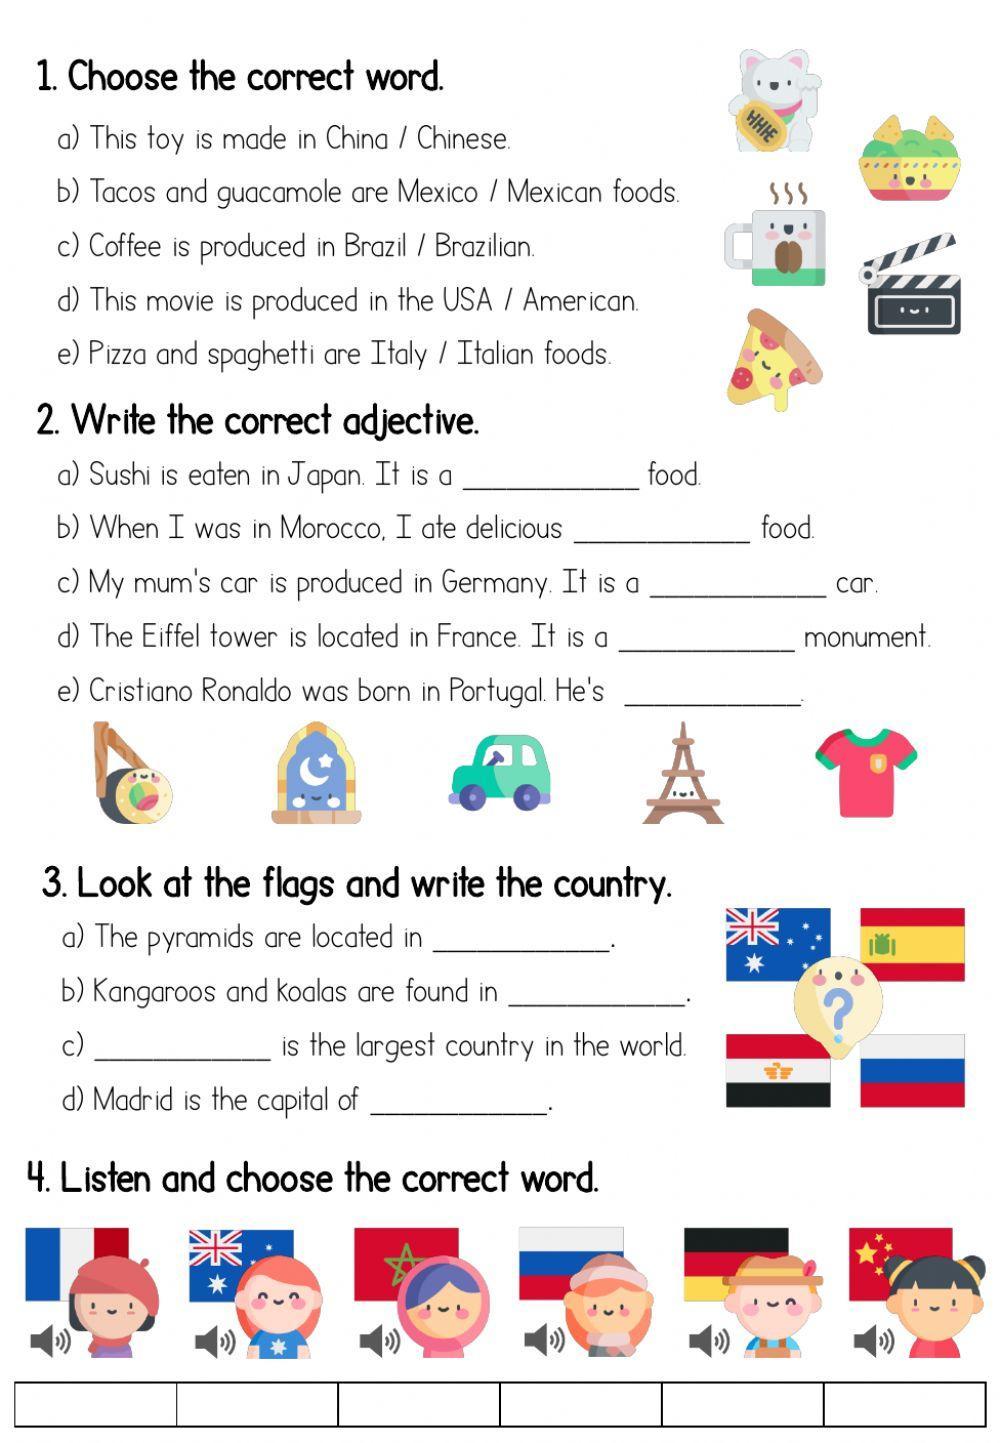 Countries and adjectives